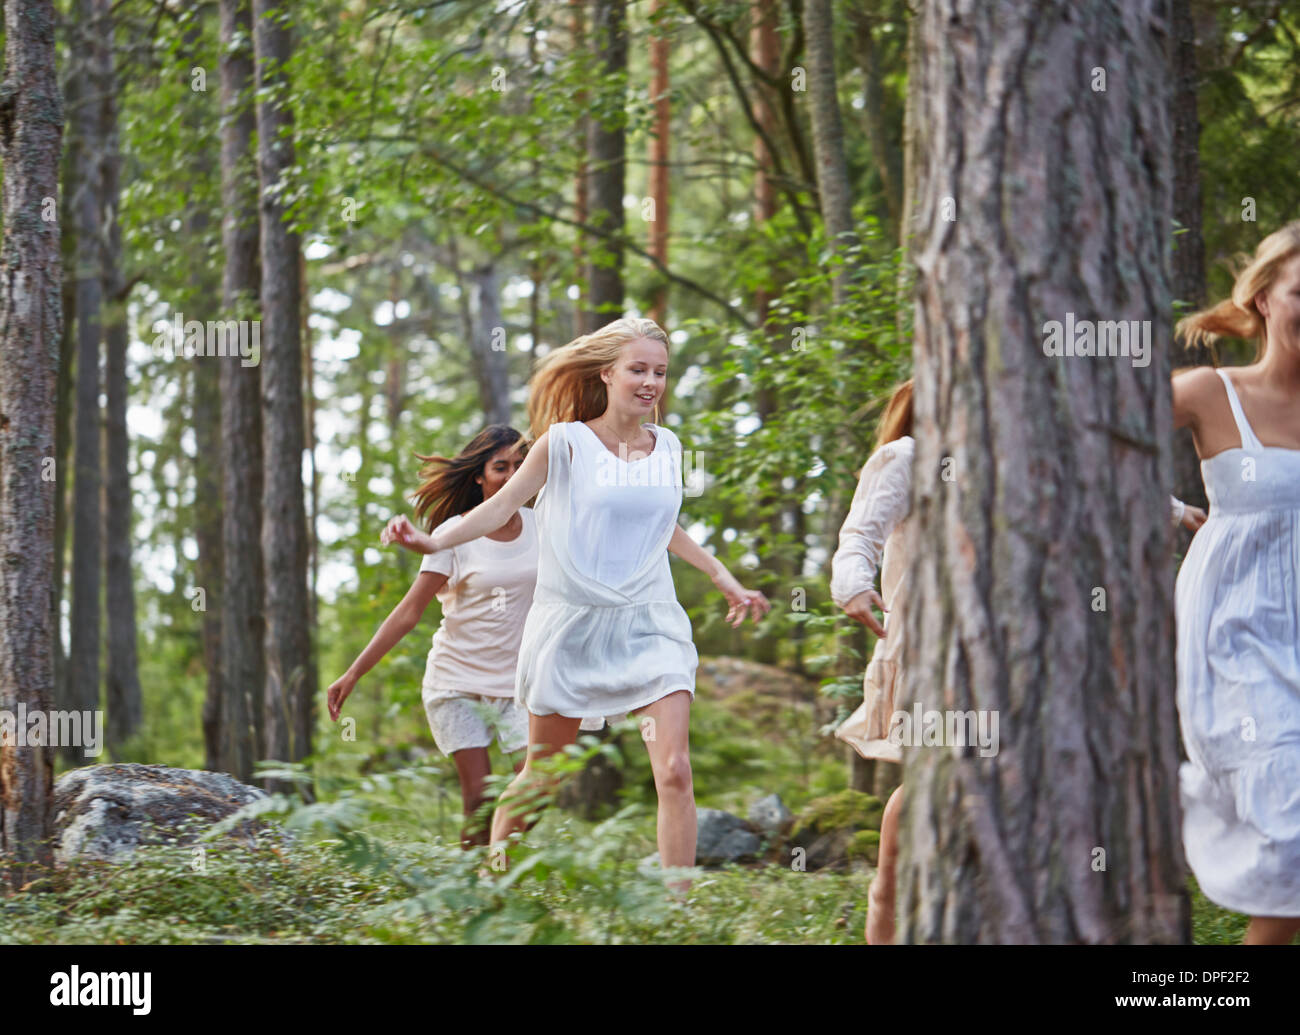 Teenage Girls Running In Forest Stock Photo 65484806 Alamy